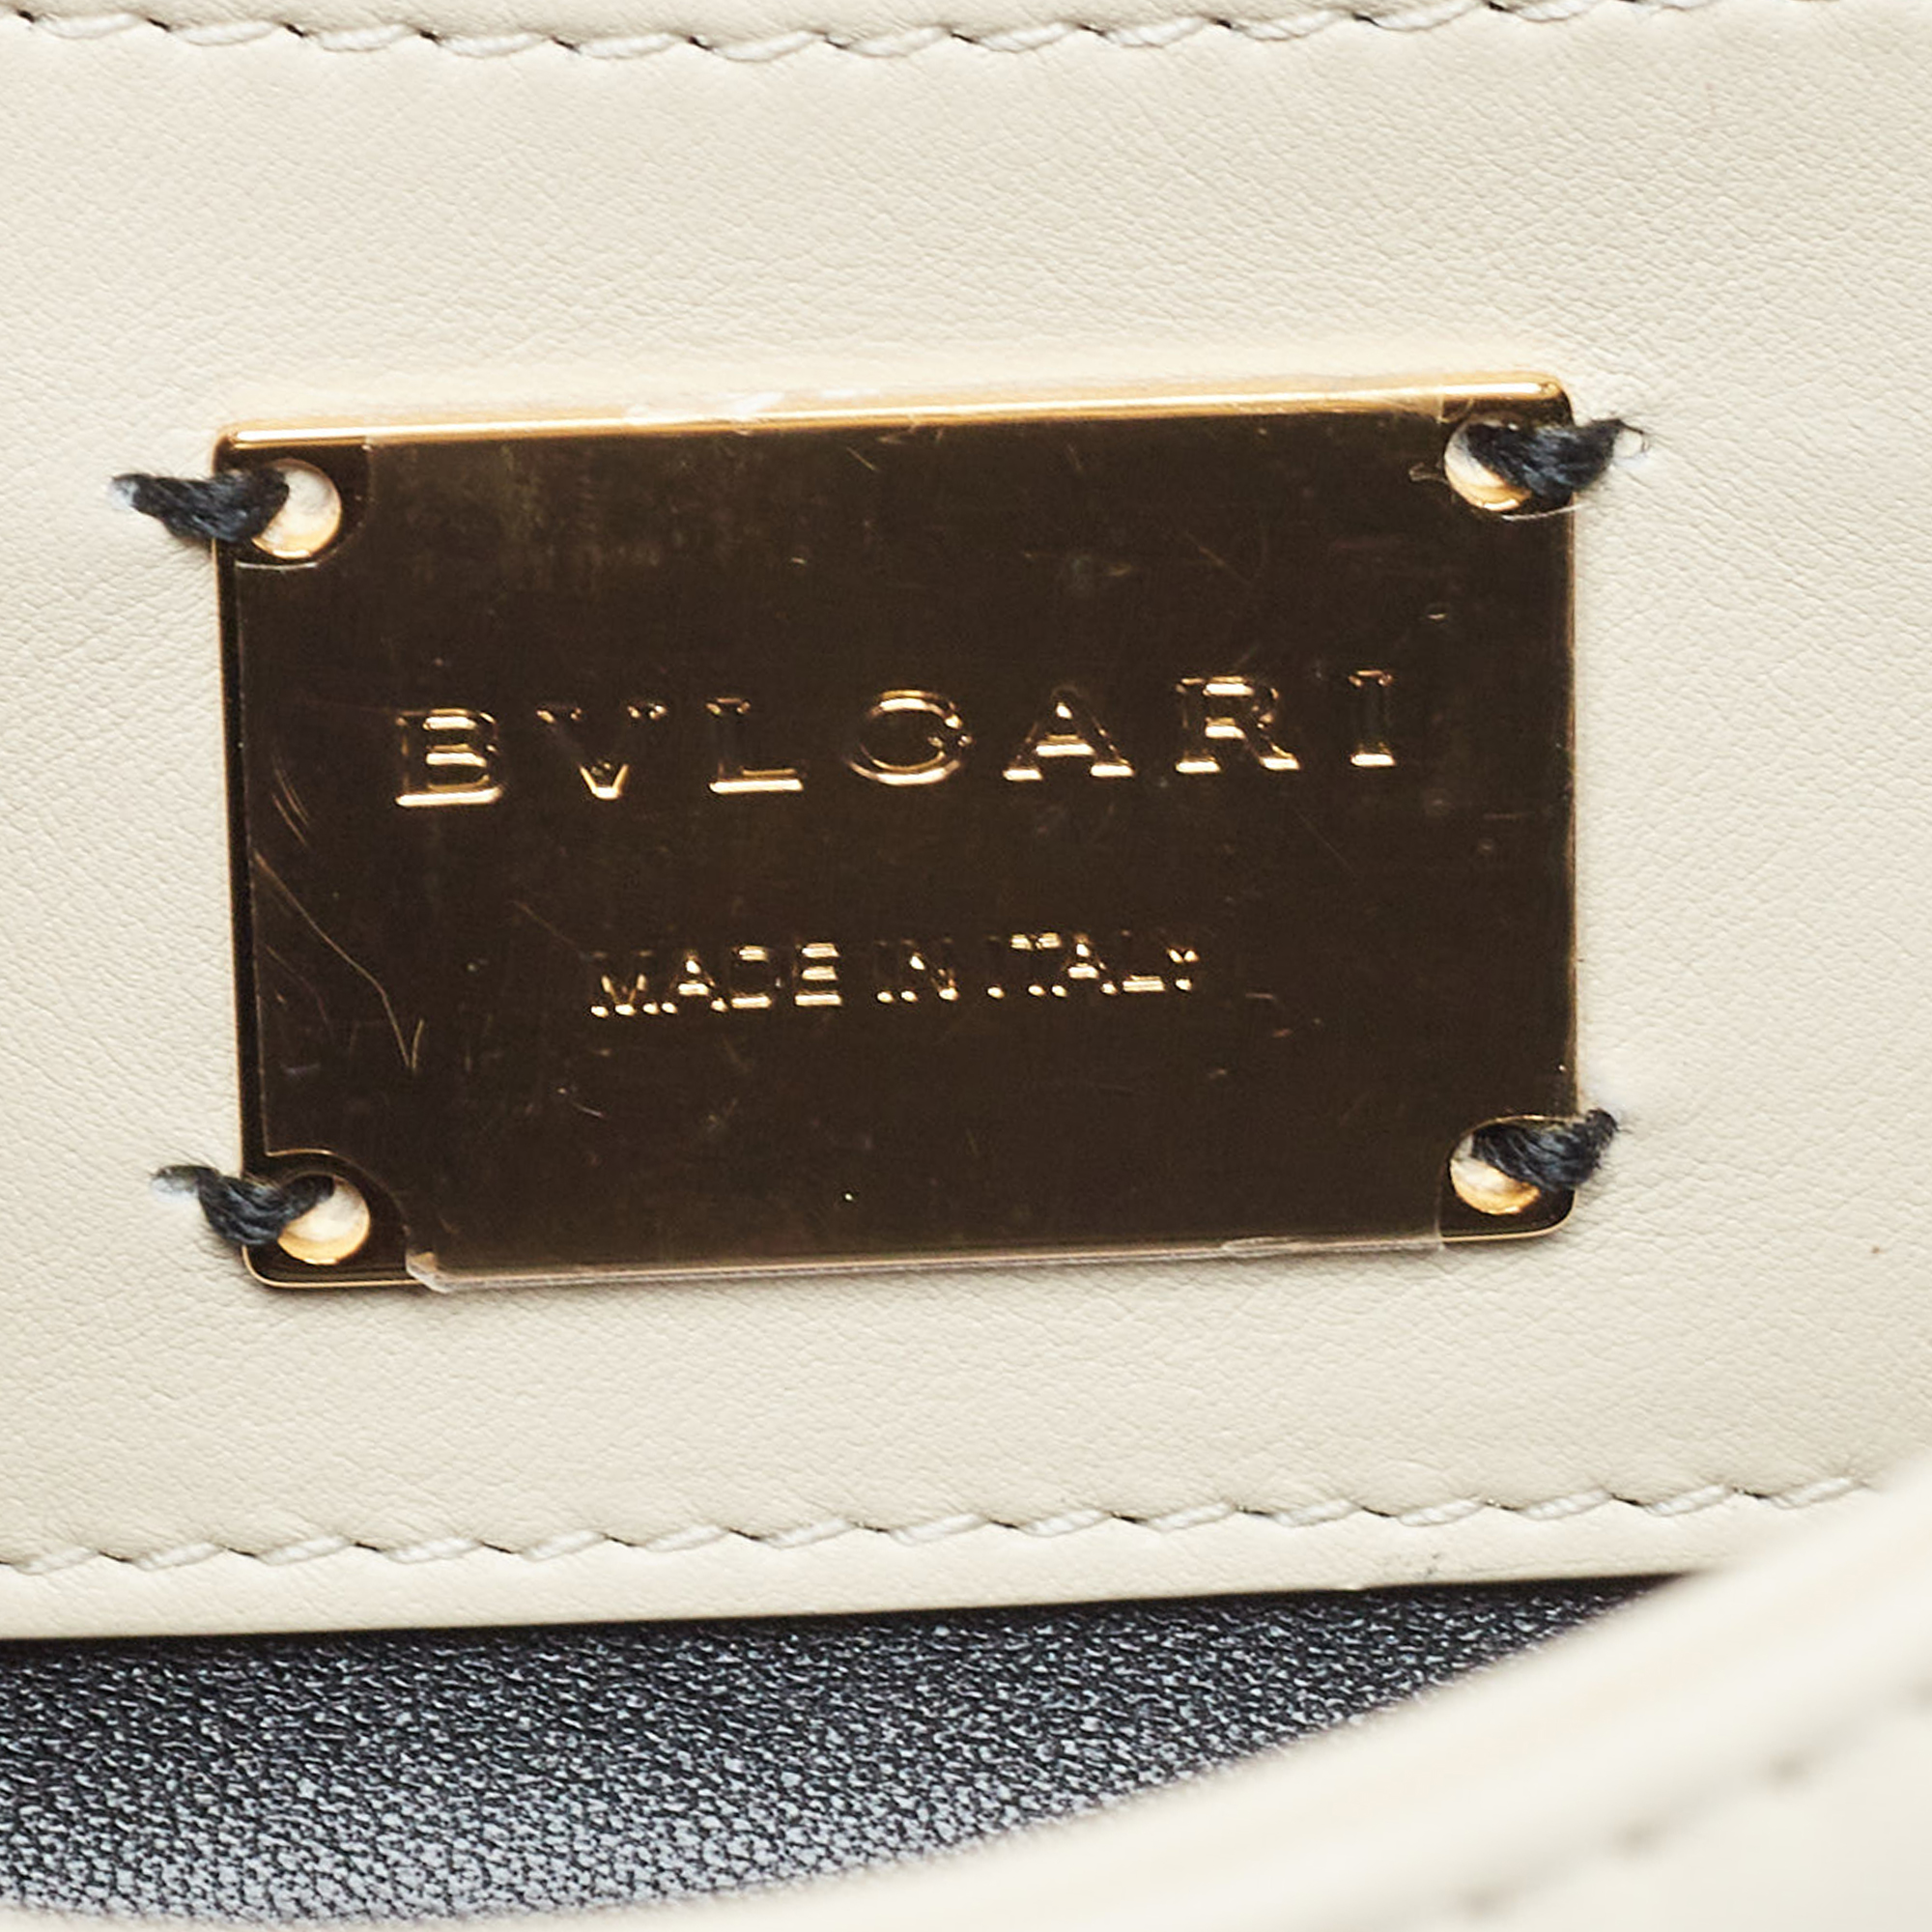 Bvlgari Ivory Quilted Leather Mini Serpenti Cabochon Crossbody Bag